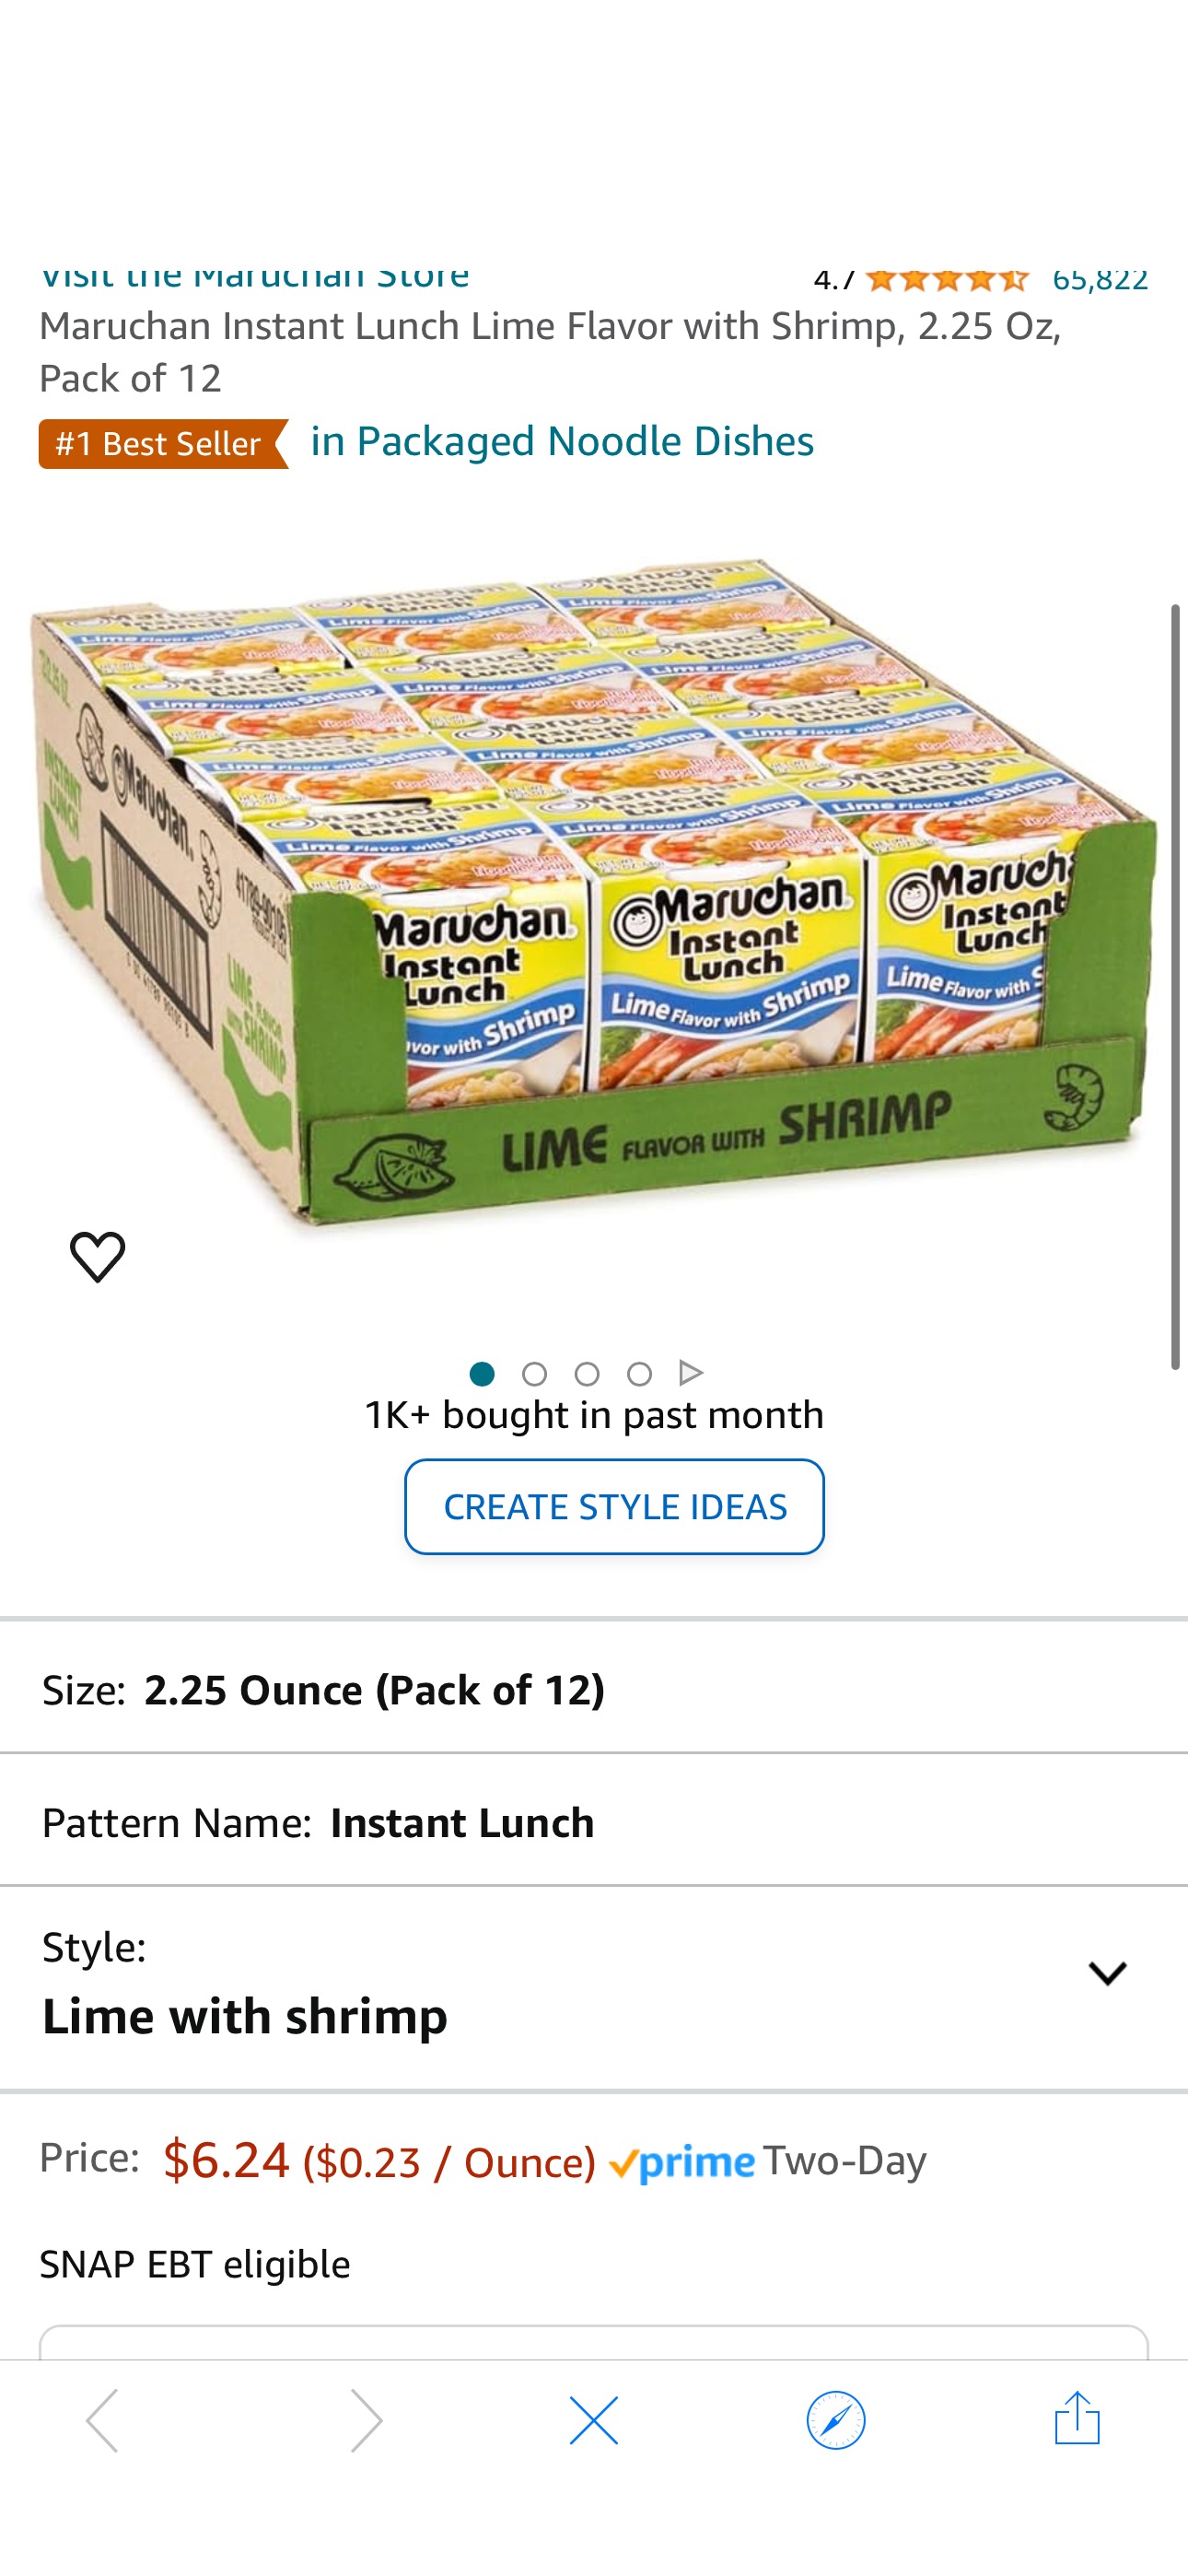 Amazon.com: Maruchan Instant Lunch Lime Flavor with Shrimp, 2.25 Oz, Pack of 12 : Grocery & Gourmet Food